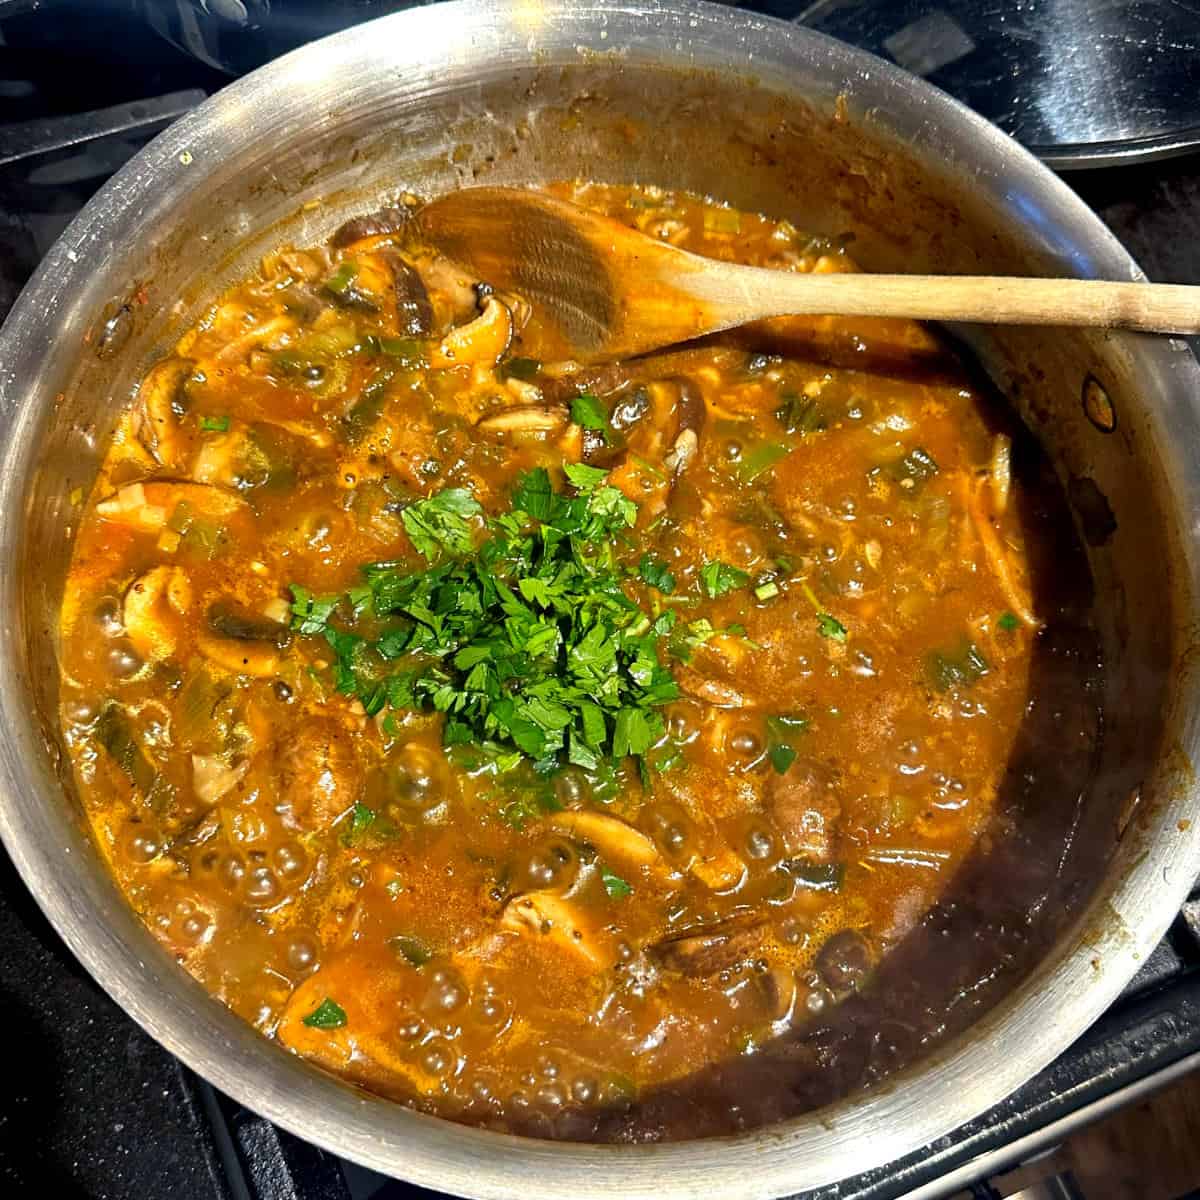 Parsley added to cooked mushroom stew.